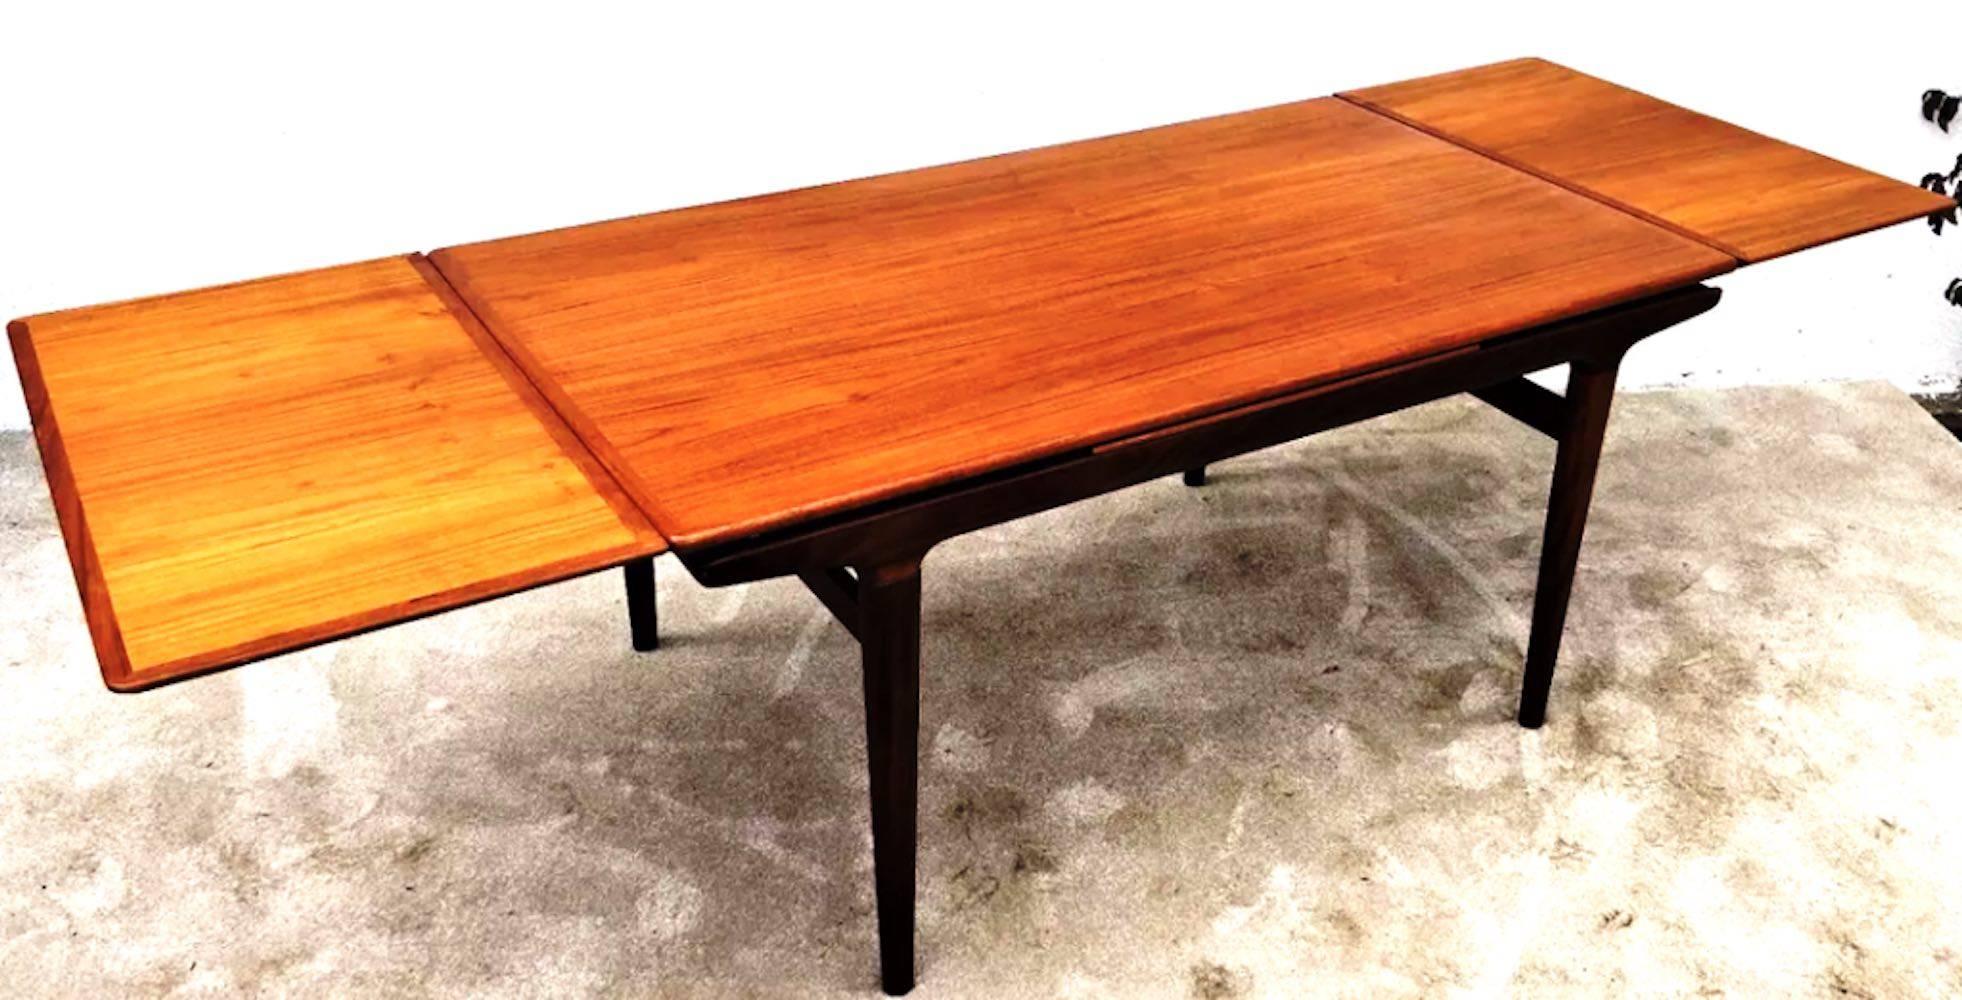 Beautiful Scandinavian teak dining tale by Johannes Andersen for Mobelfabrik, late 1950s.
With built-in extensions, Denmark.
Dimensions without extensions:
W 160 cm, D 90 cm, H 73 cm

With extensions
Width 260 cm.